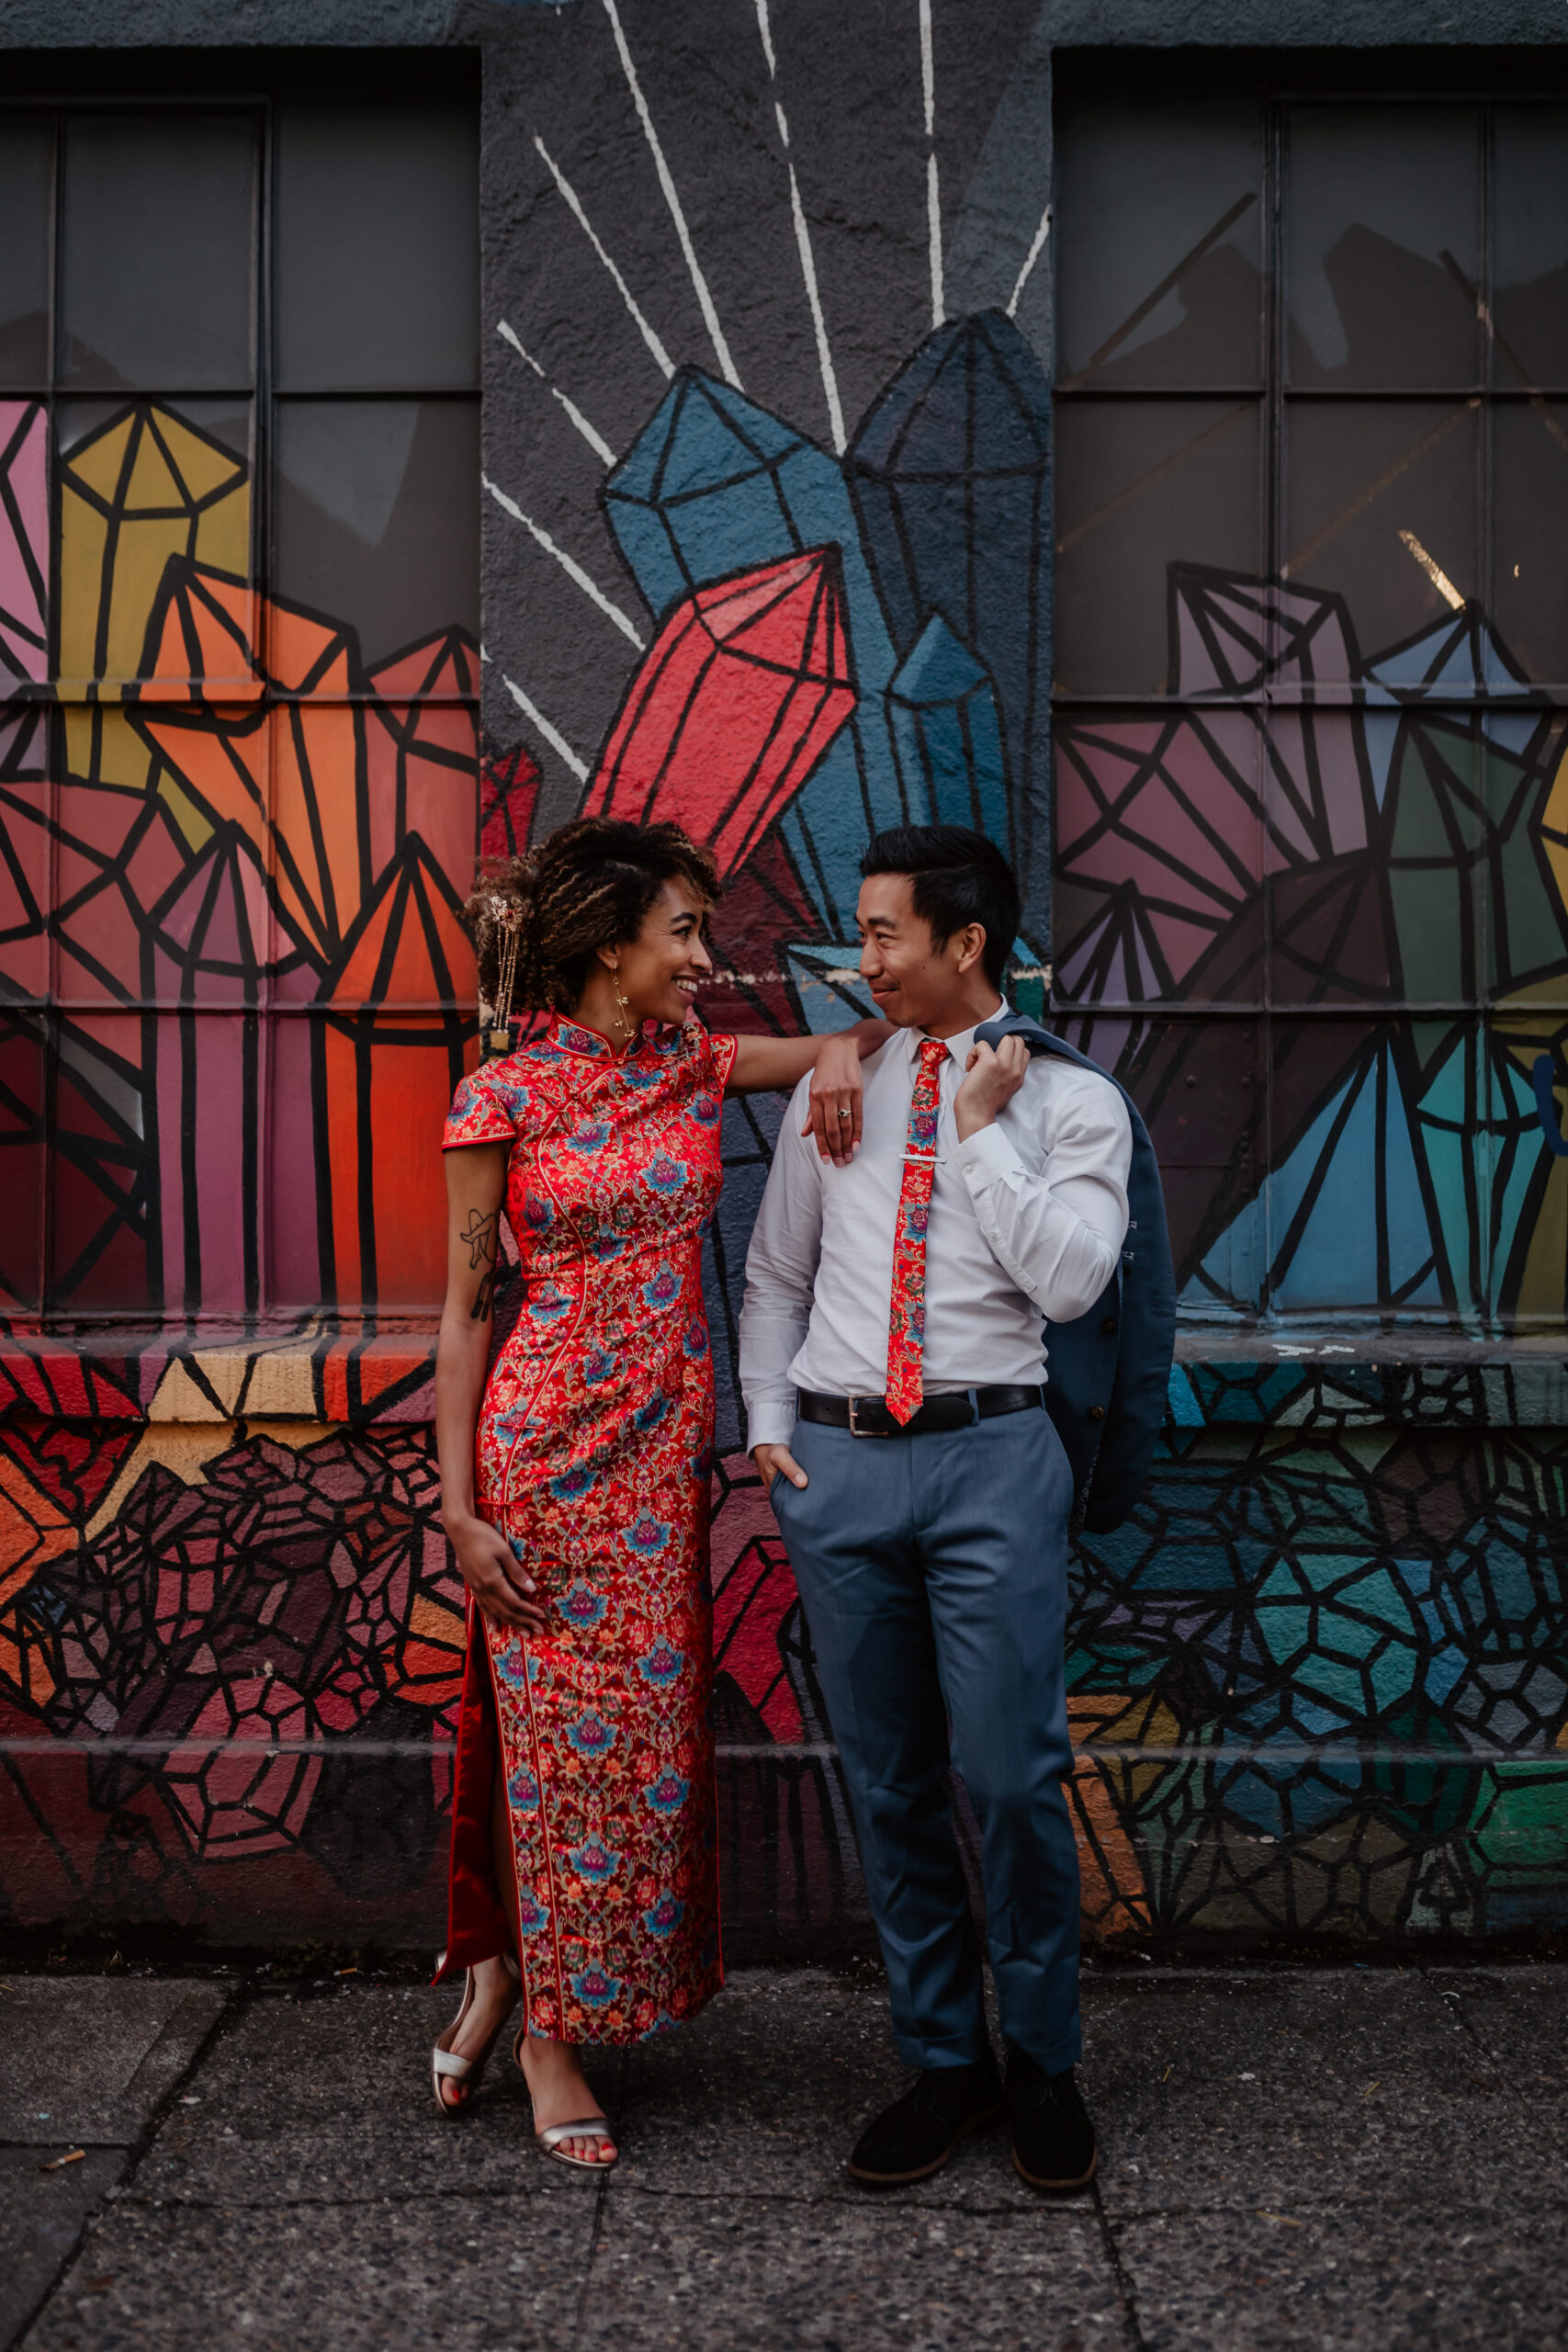 Woman in a red cheongsam leaning against a man in front of a colorful mural in Seattle